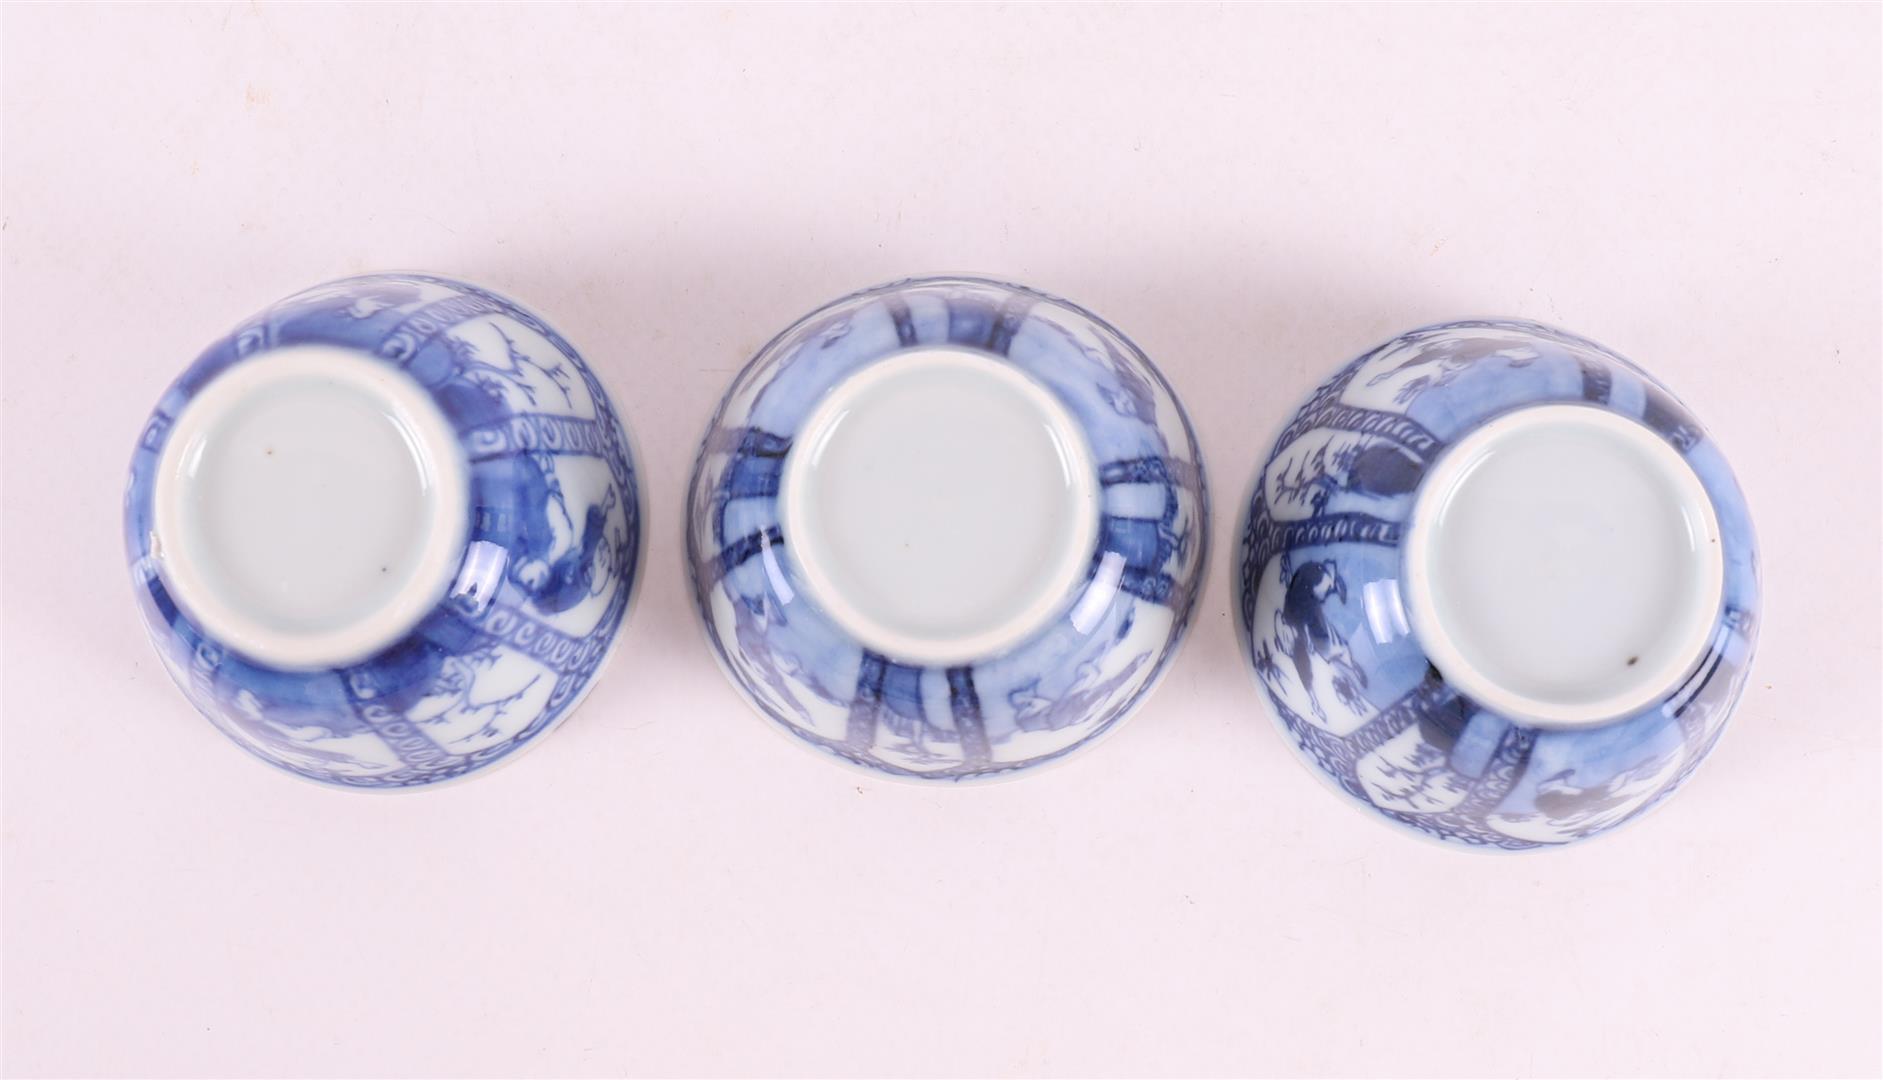 Six blue/white porcelain cups and saucers, China, Kangxi, around 1700. - Image 18 of 18